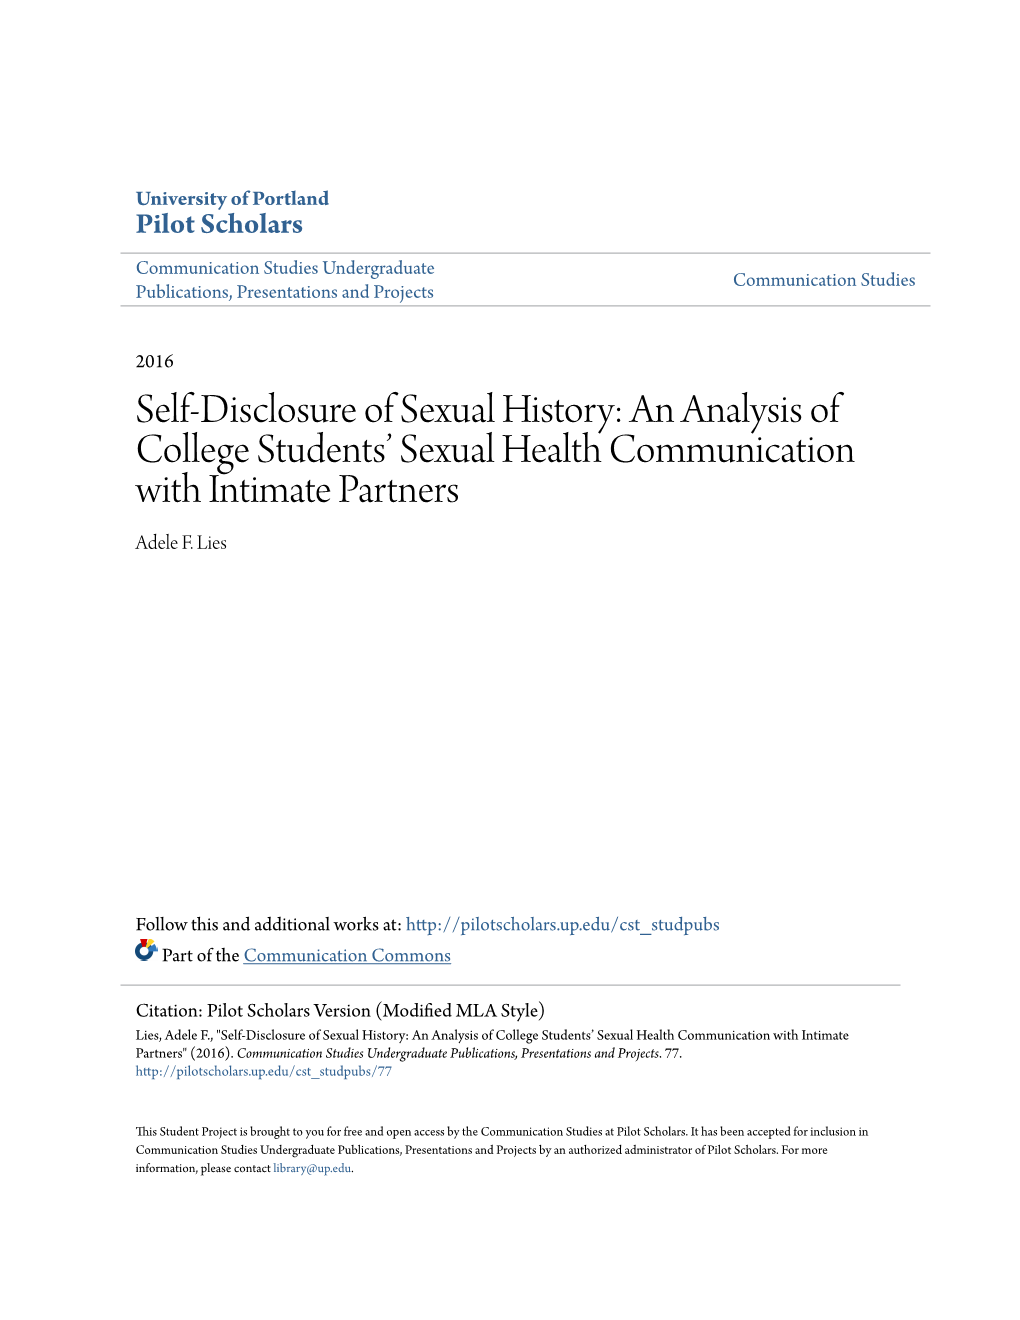 Self-Disclosure of Sexual History: an Analysis of College Students’ Sexual Health Communication with Intimate Partners Adele F